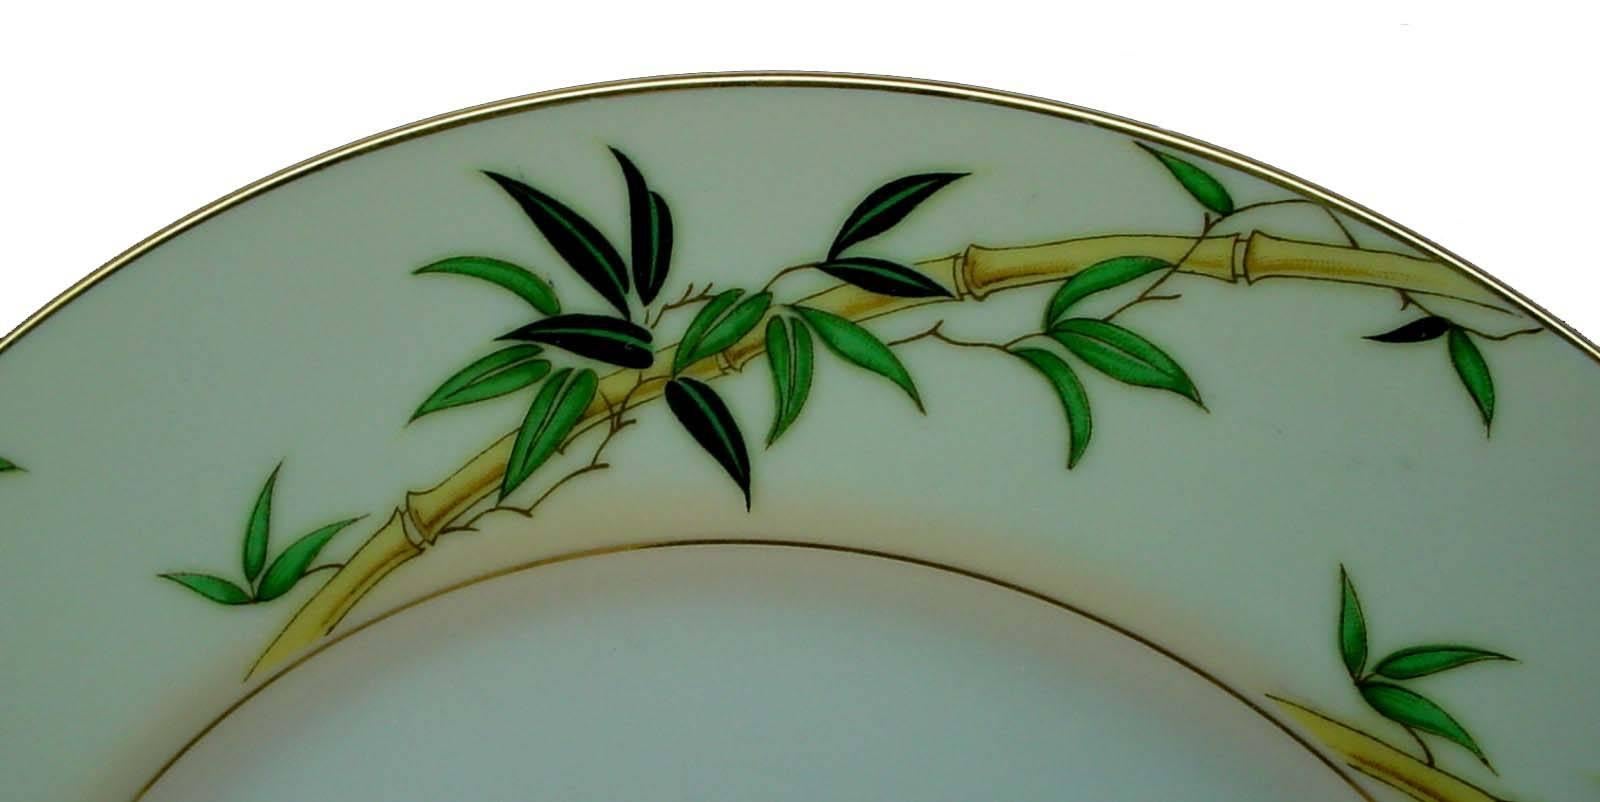 KENT china BALI HAI pattern 76-piece Set Service

in great condition free from chips, cracks, break or stain.

• Bamboo on Rim. 

• Includes 12 cups, 12 saucers, 12 dinner plates, 7 salad/dessert plates, 12 bread plates, 11 fruit/dessert/sauce